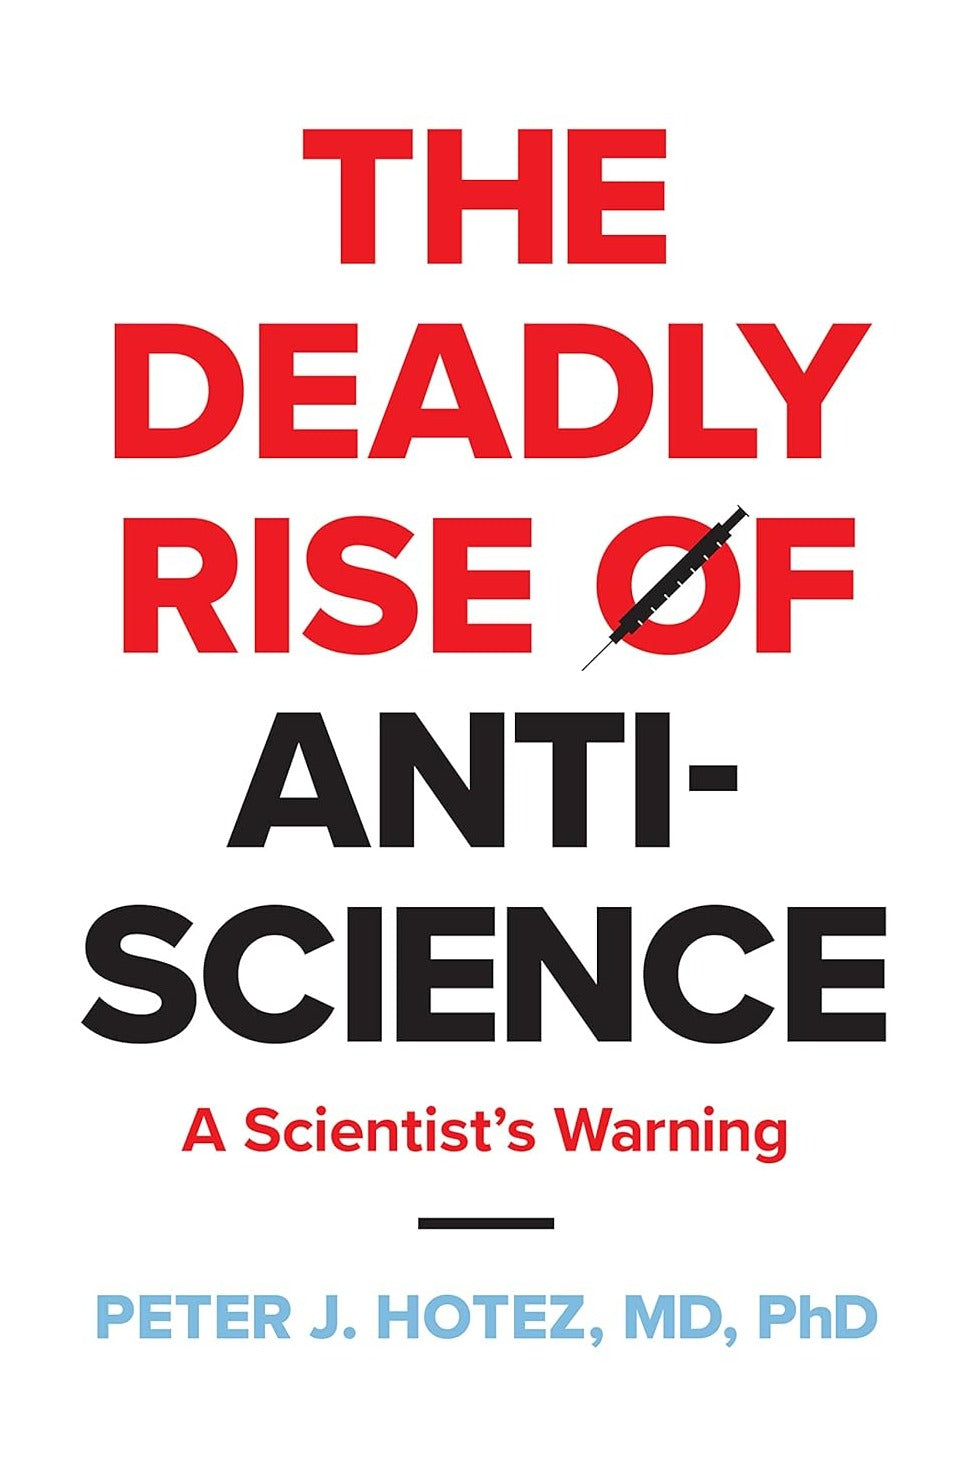 THE DEADLY RISE OF ANTI SCIENCE